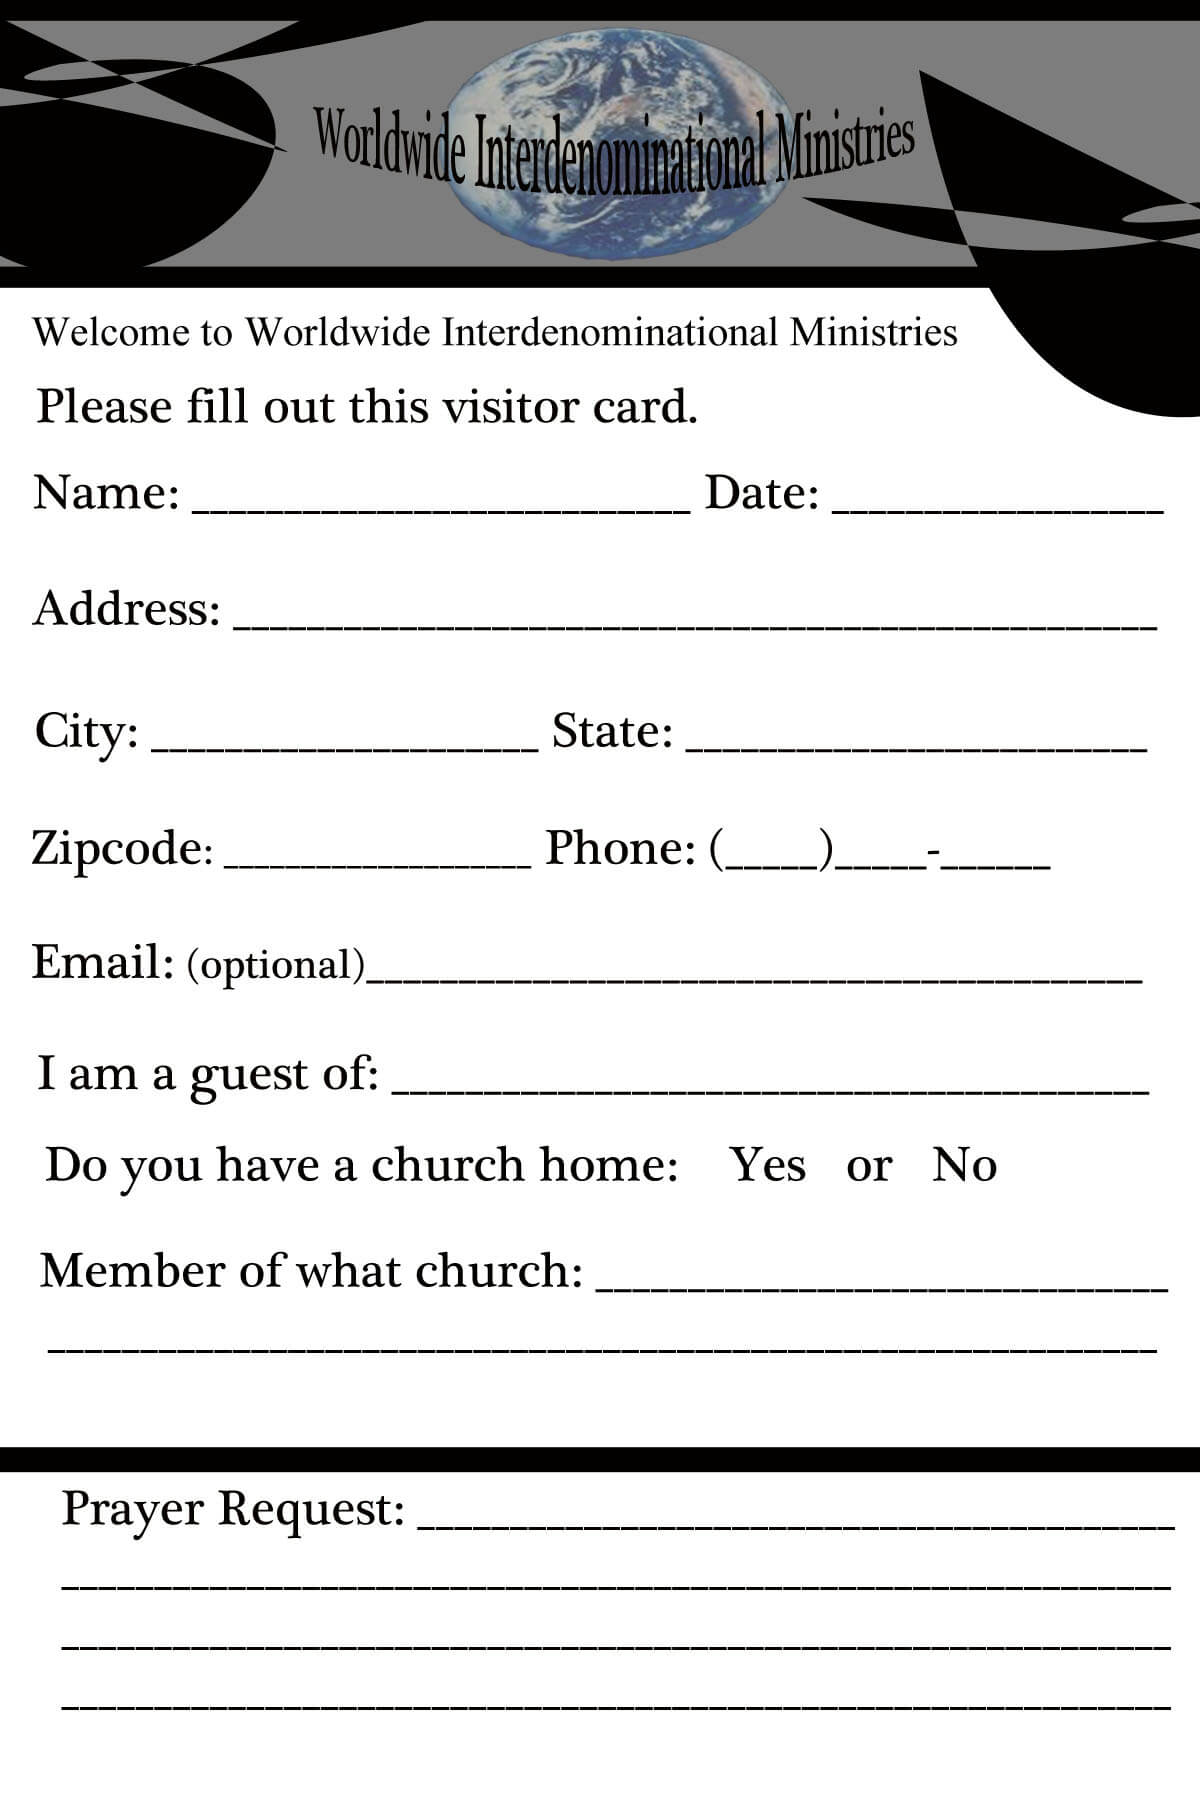 Church Visitor Cards 5 Tips to Follow Up With Church Visitors